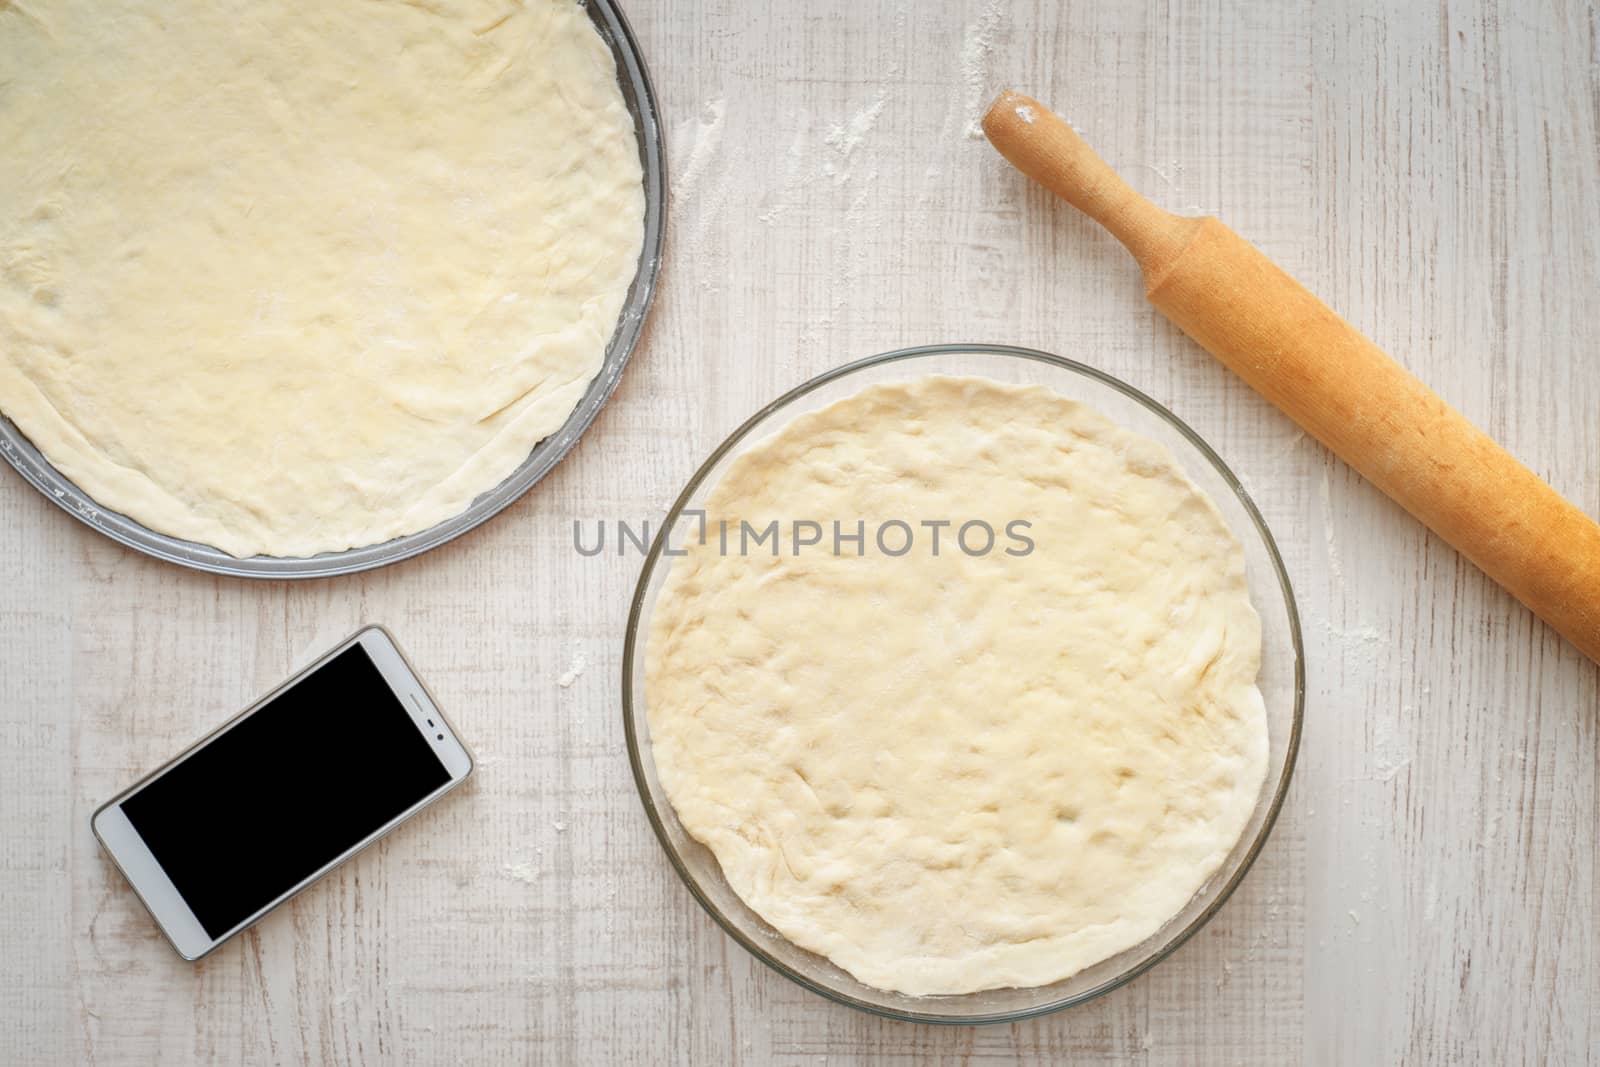 Ready dough for pizzas in forms for baking by Deniskarpenkov